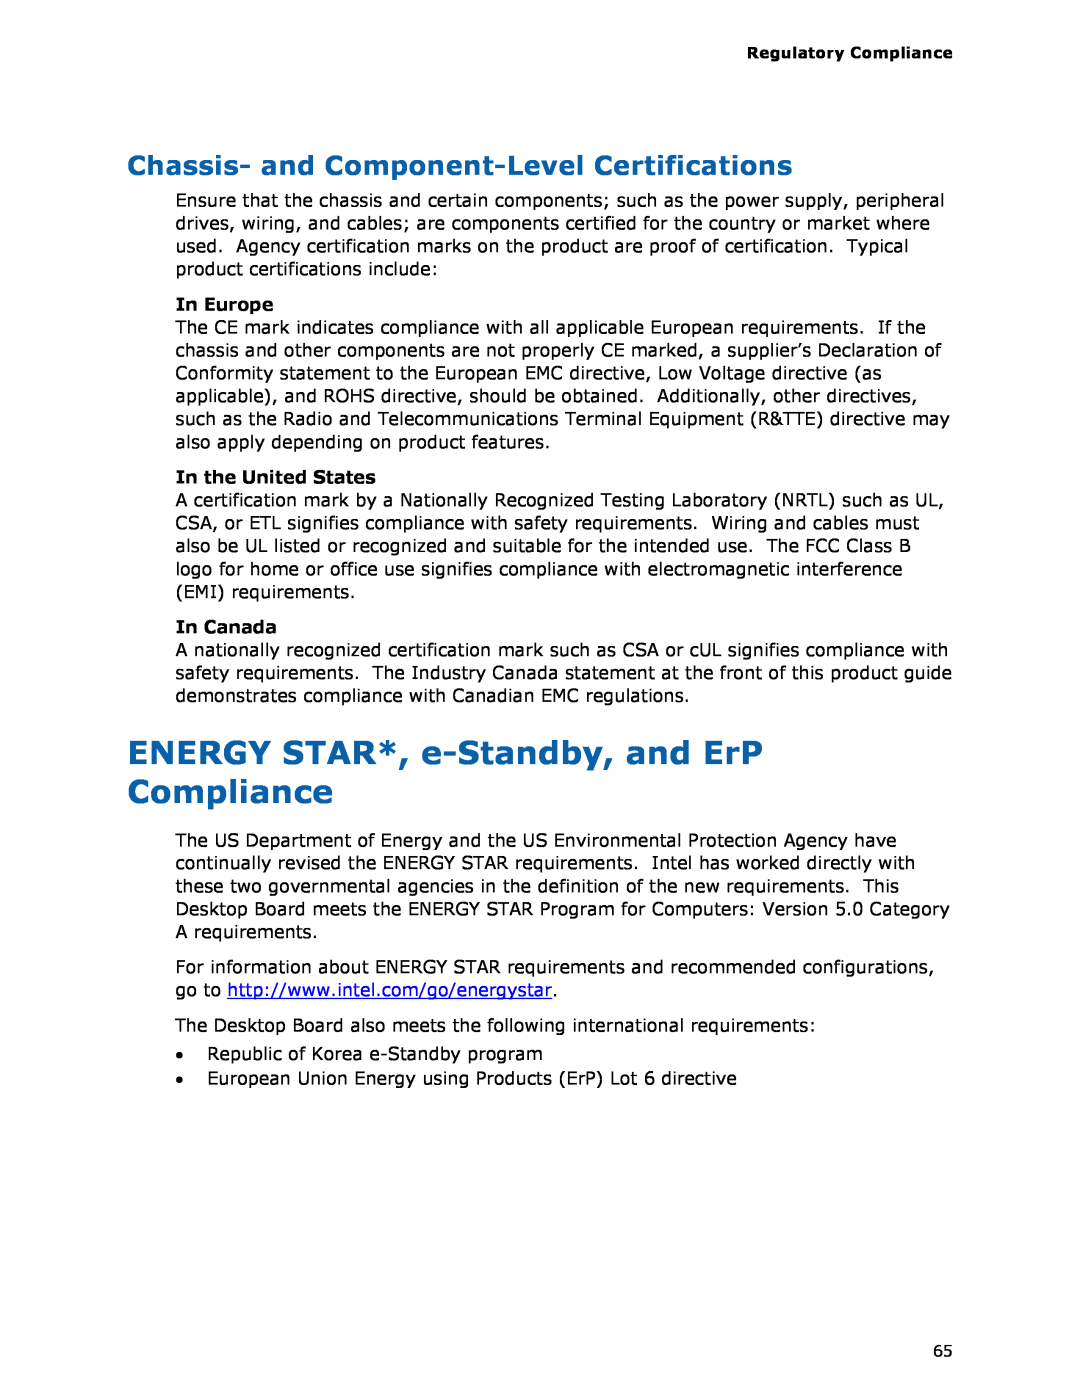 Intel BOXDH61AG manual ENERGY STAR*, e-Standby, and ErP Compliance, Chassis- and Component-Level Certifications, In Europe 